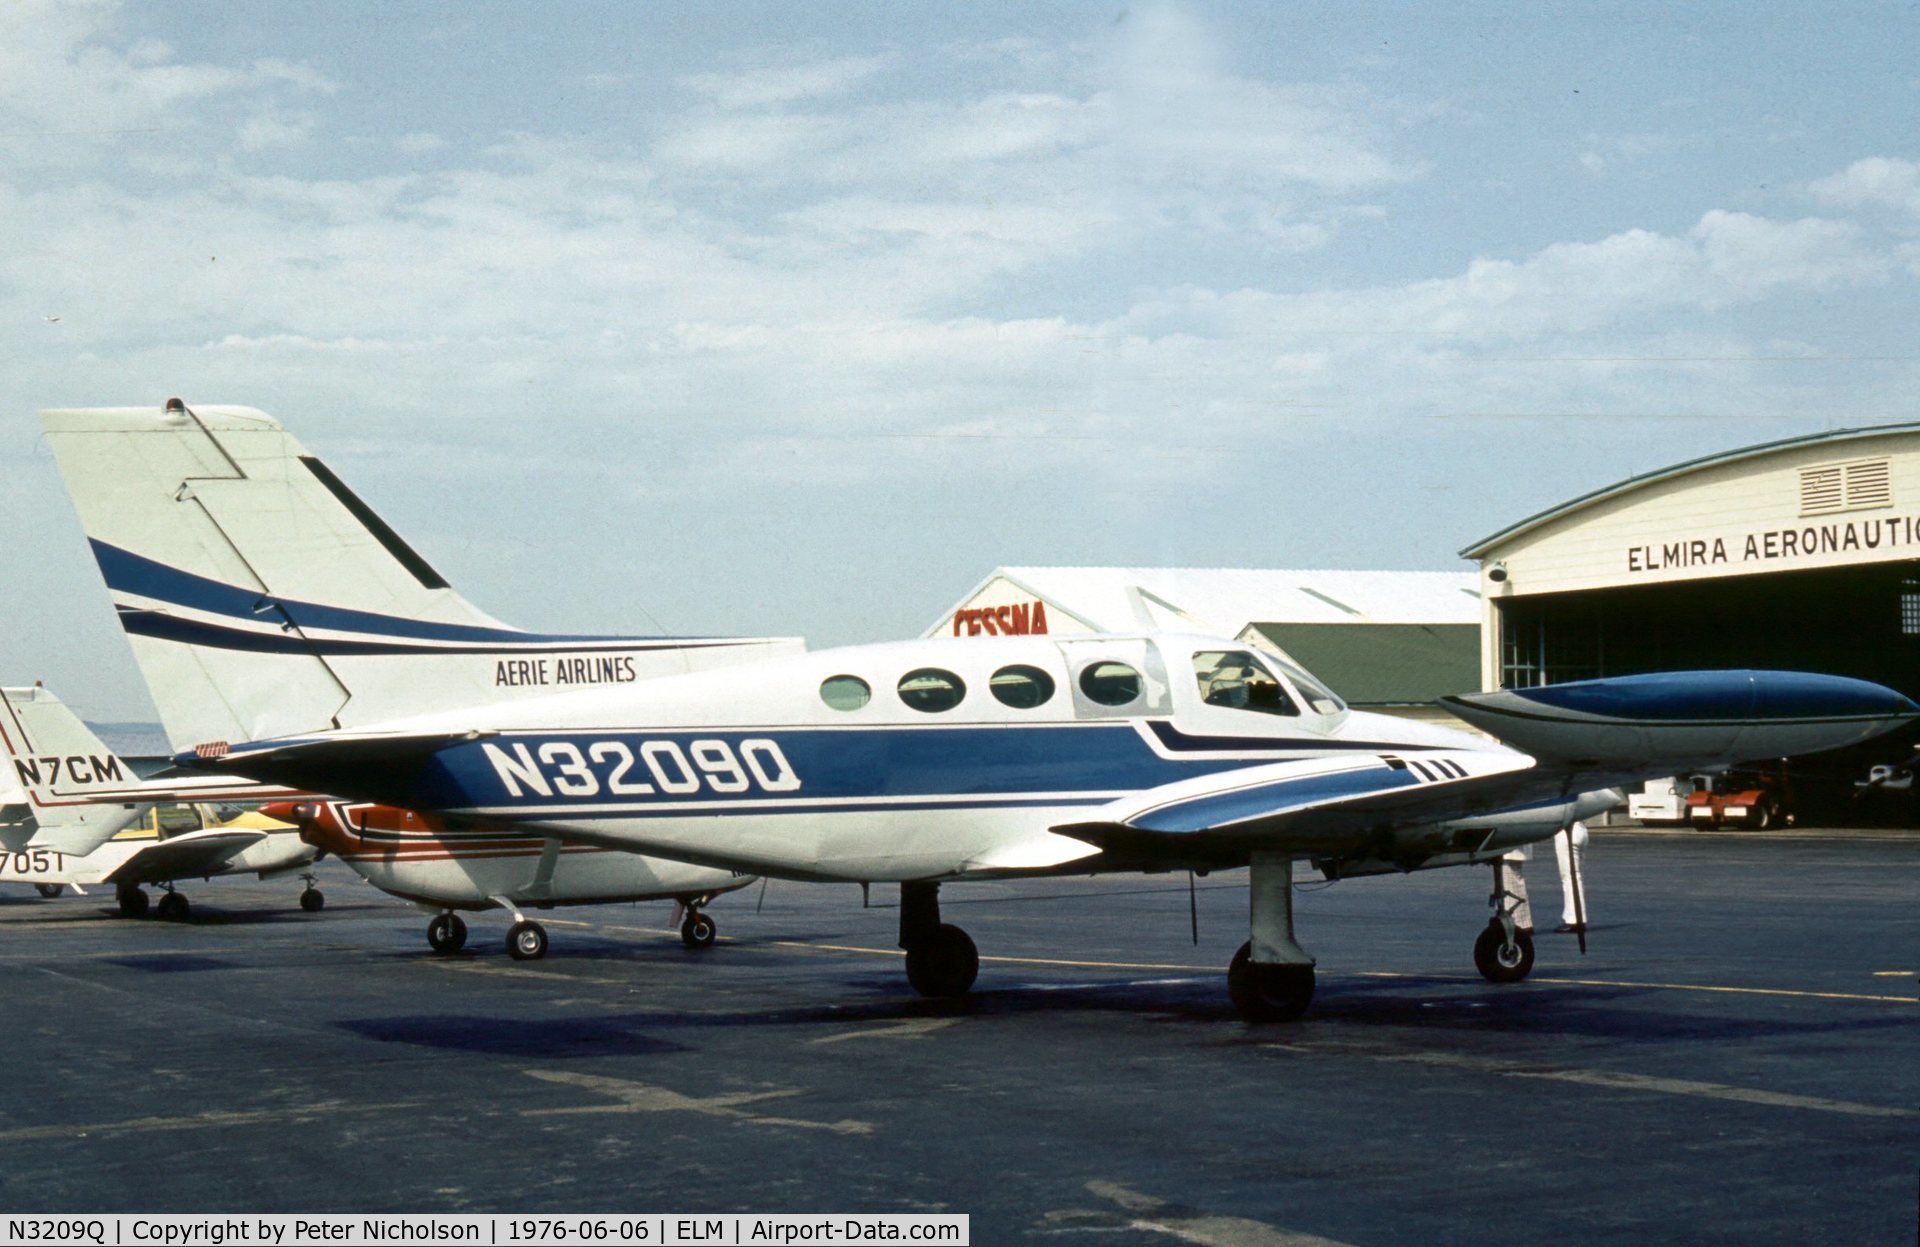 N3209Q, 1966 Cessna 402 C/N 402-0009, Cessna 402 of Aerie Airlines on the ramp at Chemung County Airport in the Summer of 1976.